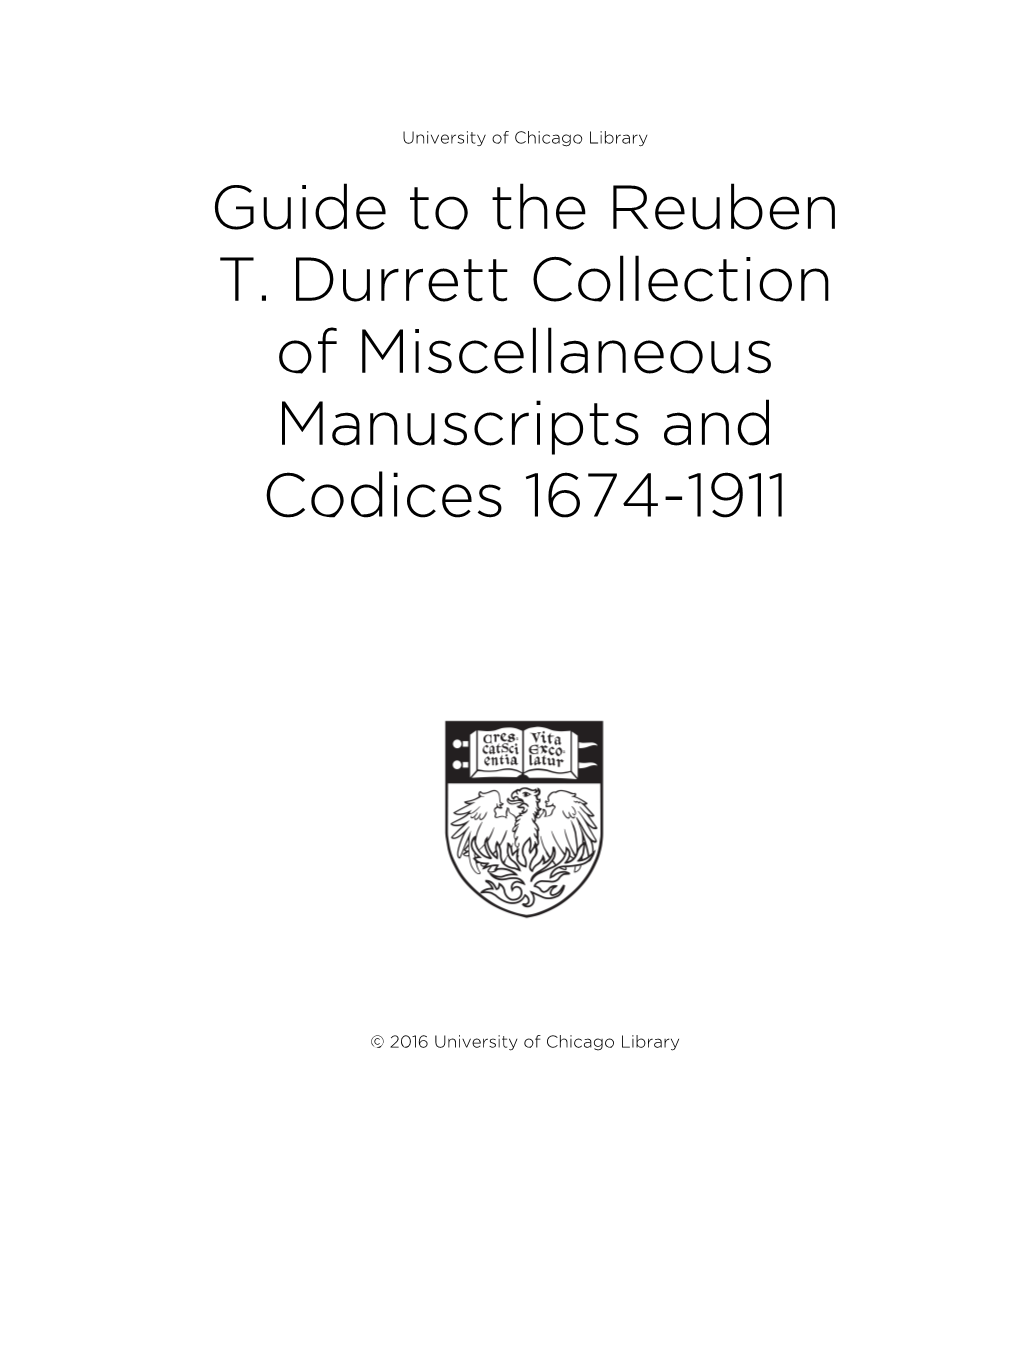 Guide to the Reuben T. Durrett Collection of Miscellaneous Manuscripts and Codices 1674-1911